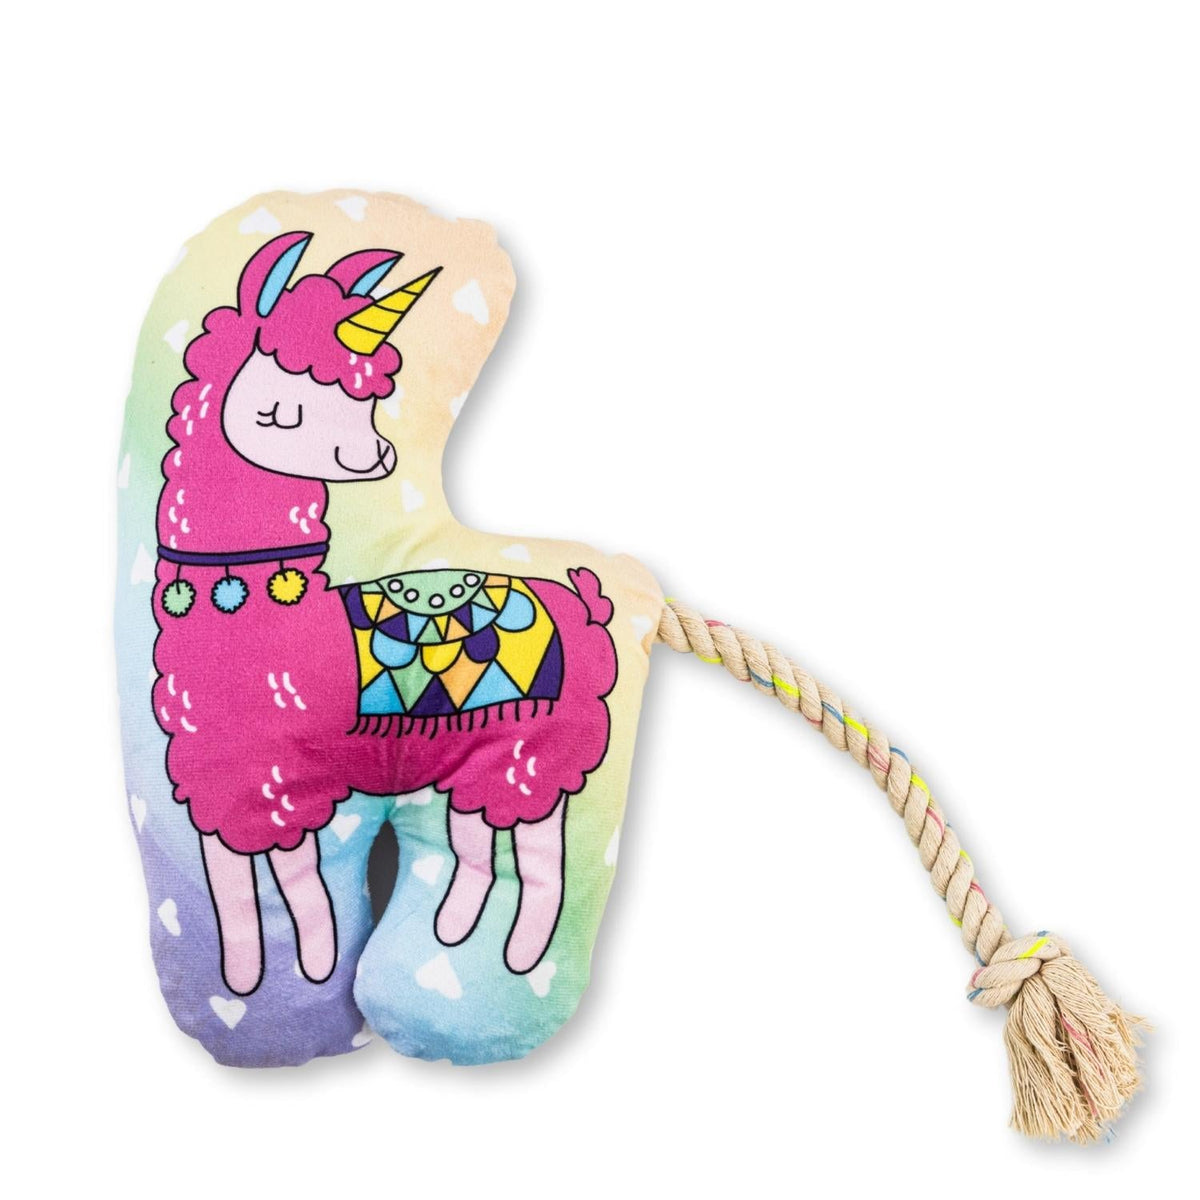 Magical Llama Plush Dog Toy with Crinkle and Squeak Features by American Pet Supplies